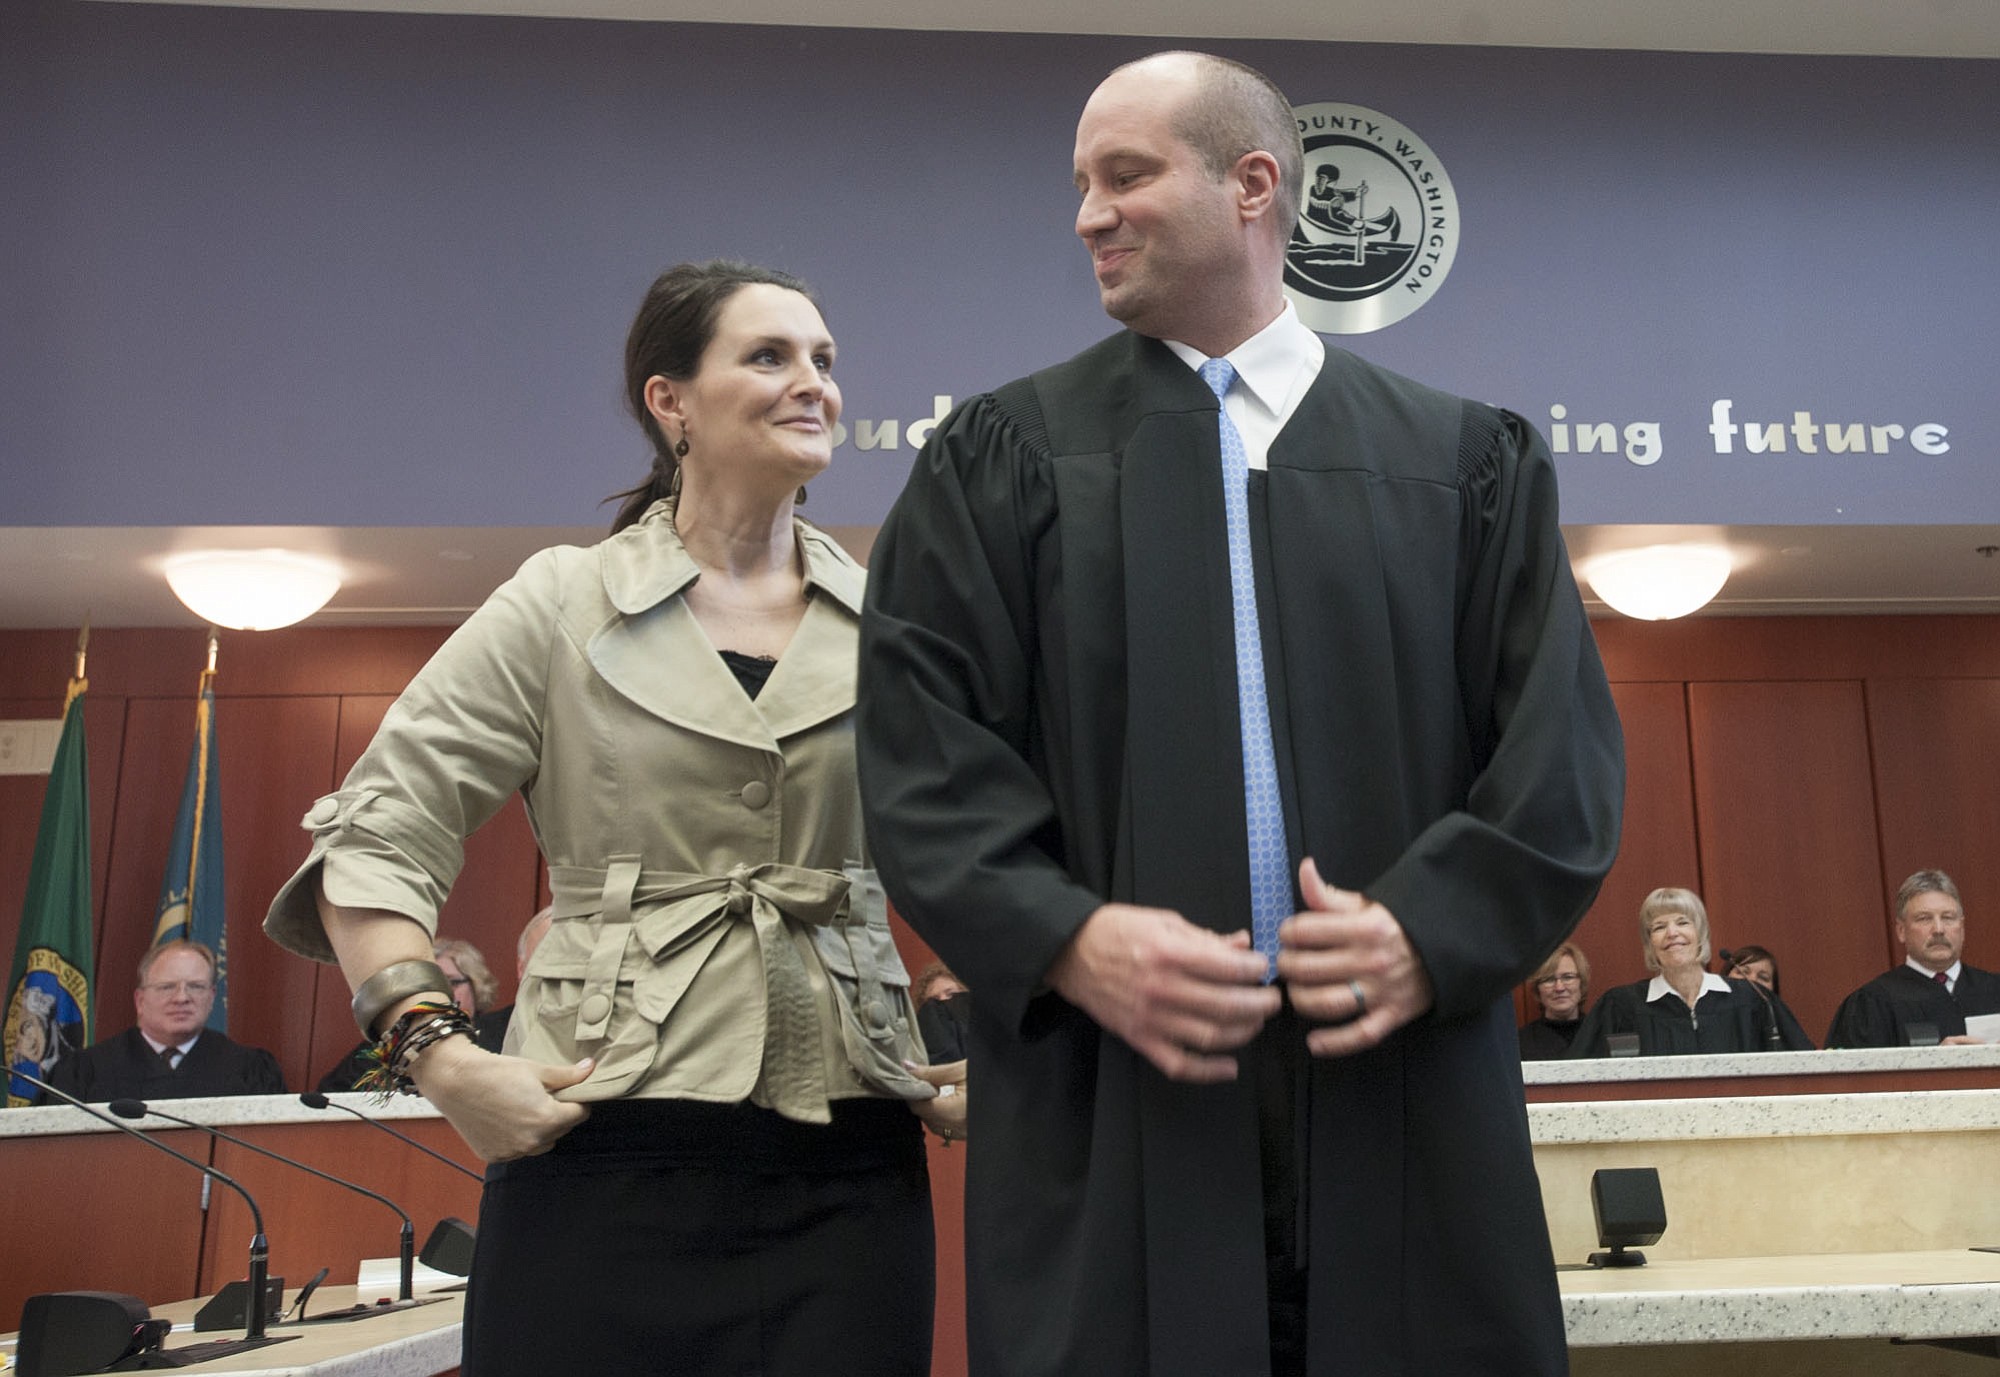 Derek Vanderwood dons a judge's robe for the first time, assisted by his wife Allison, at his swearing-in ceremony to become a judge in Clark County Superior Court.